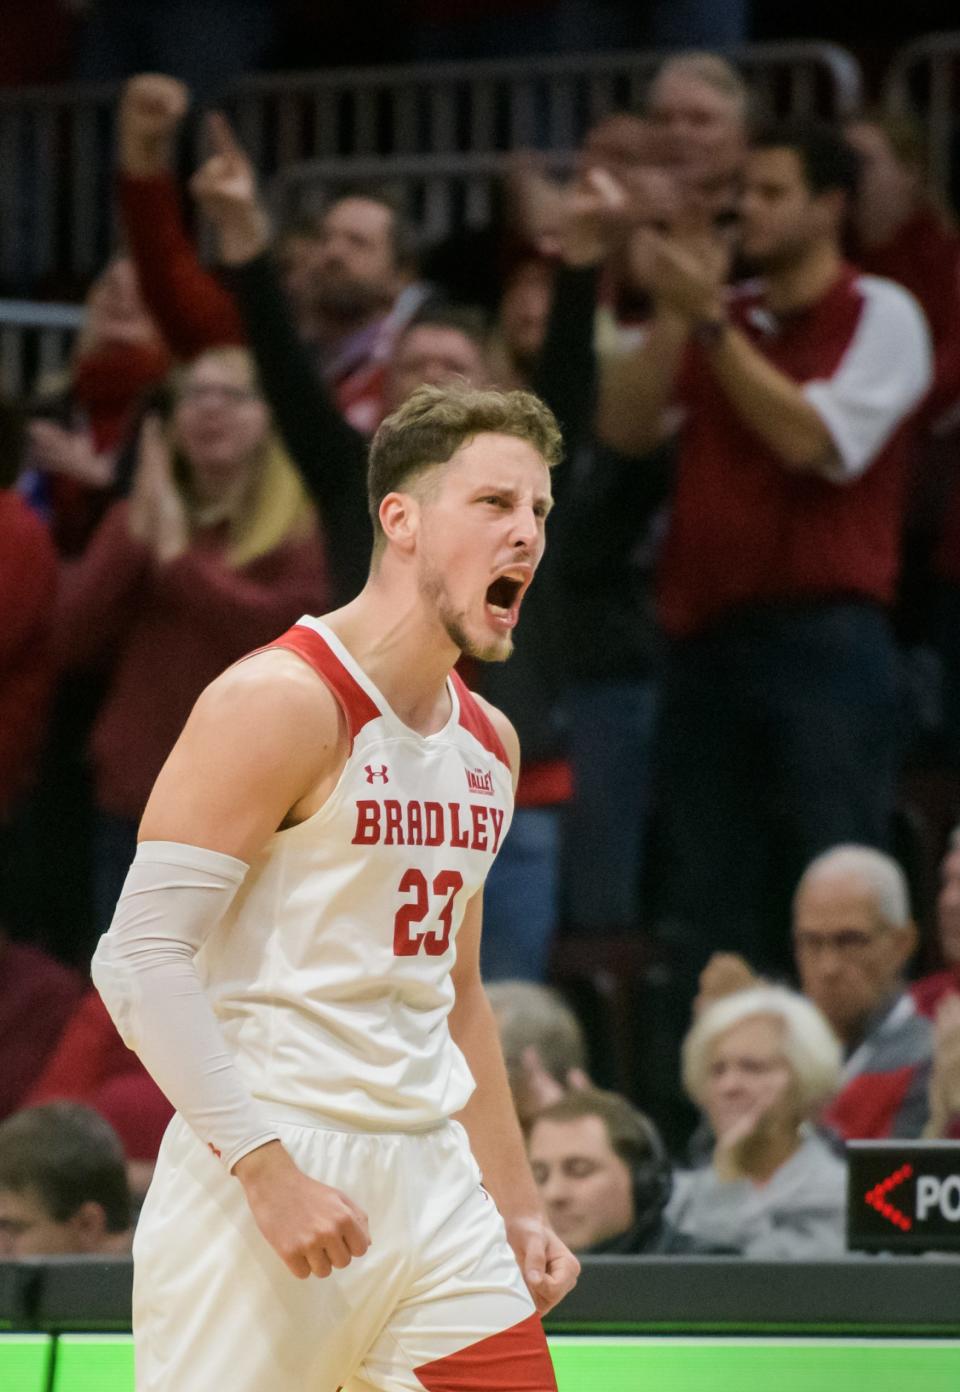 Bradley's Ville Tahvanainen shows some emotion as the Braves take a big lead over Northern Iowa late in the second half of their Missouri Valley Conference basketball opener Wednesday, Nov. 30, 2022 at Carver Arena. The Braves defeated the Panthers 68-53.